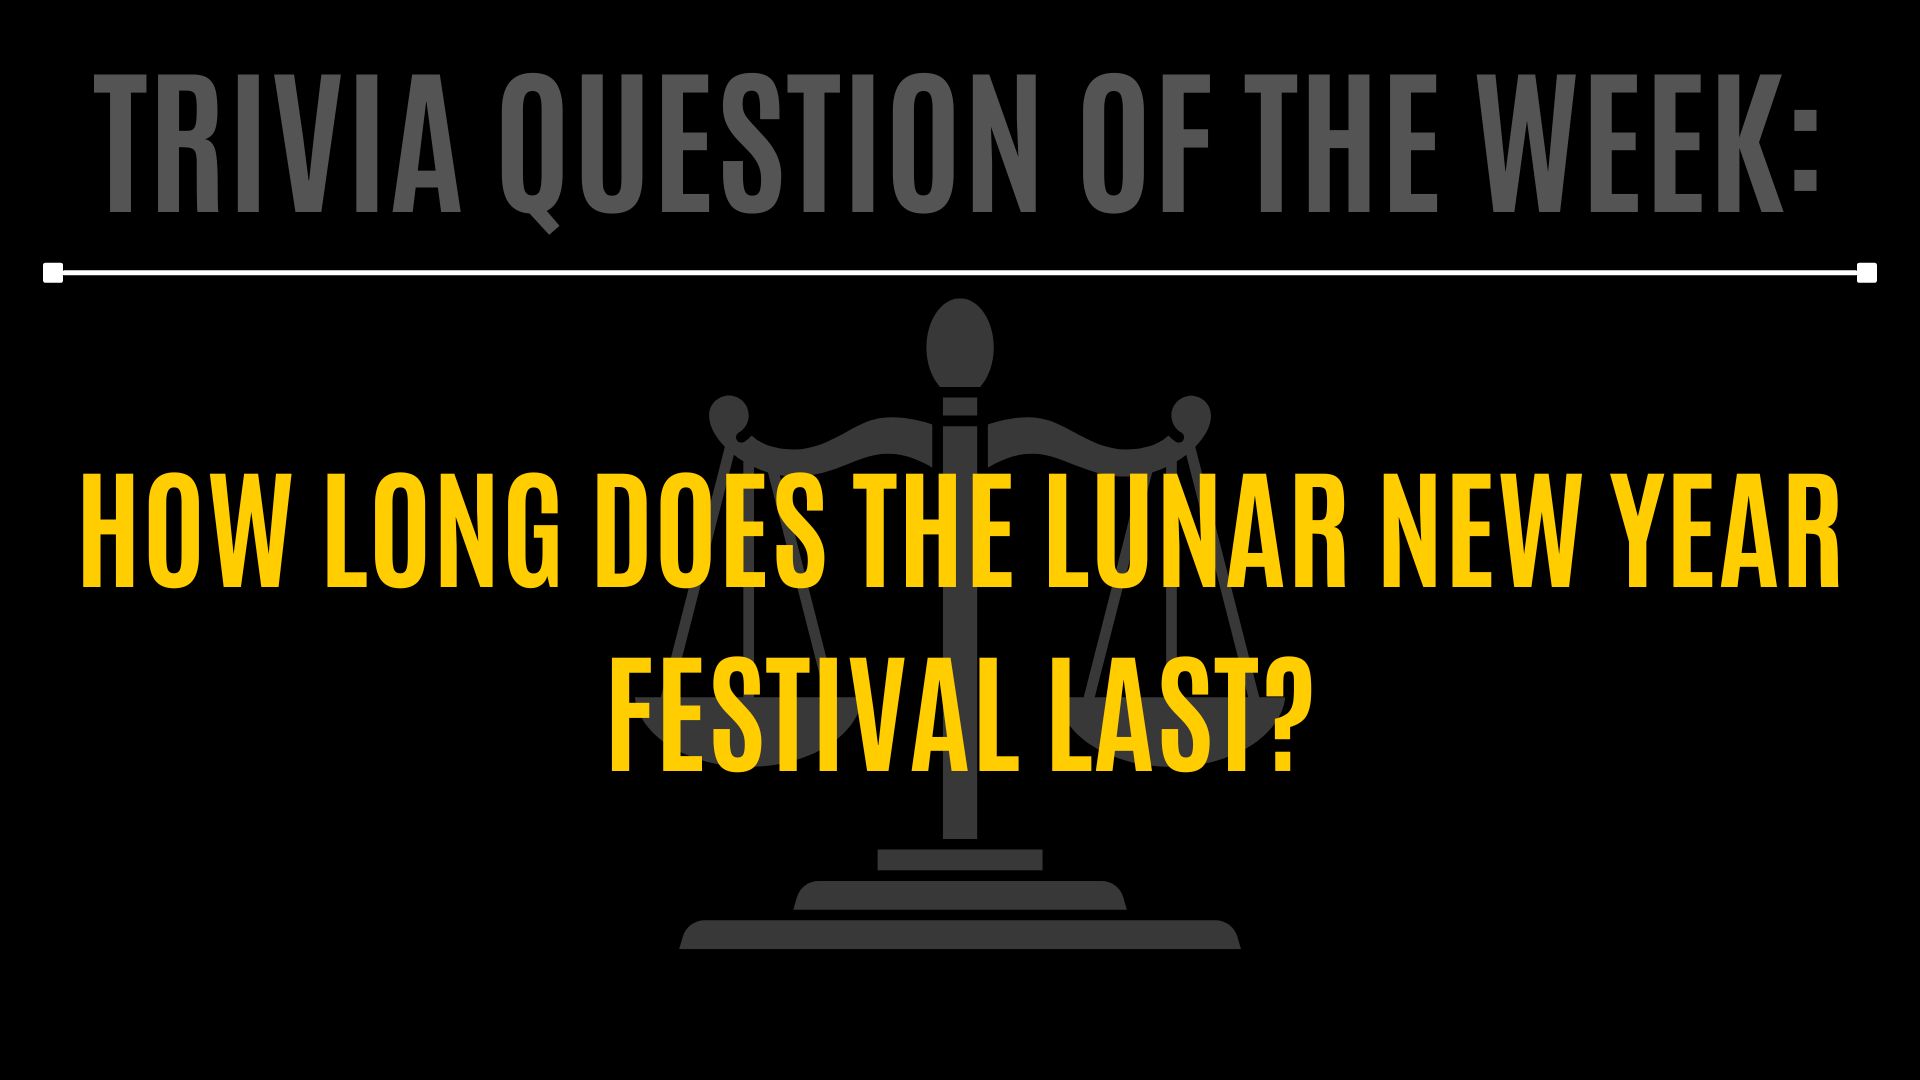 Trivia question of the week: How long does the LUNAR new year festival last? 